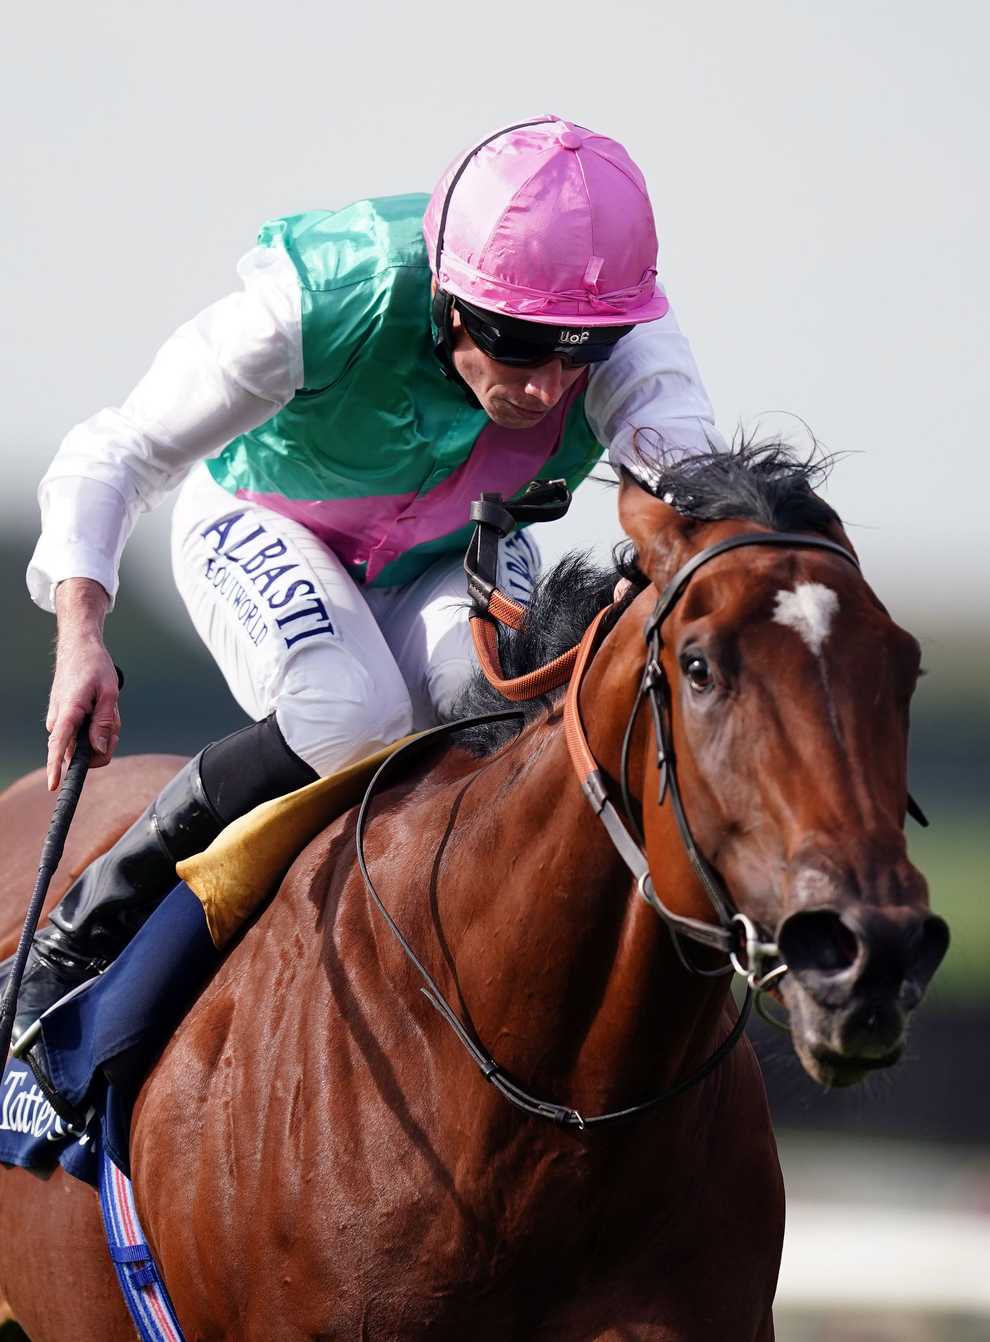 Nostrum is one of two big hopes for Juddmonte in the Dewhurst (Mike Egerton/PA)